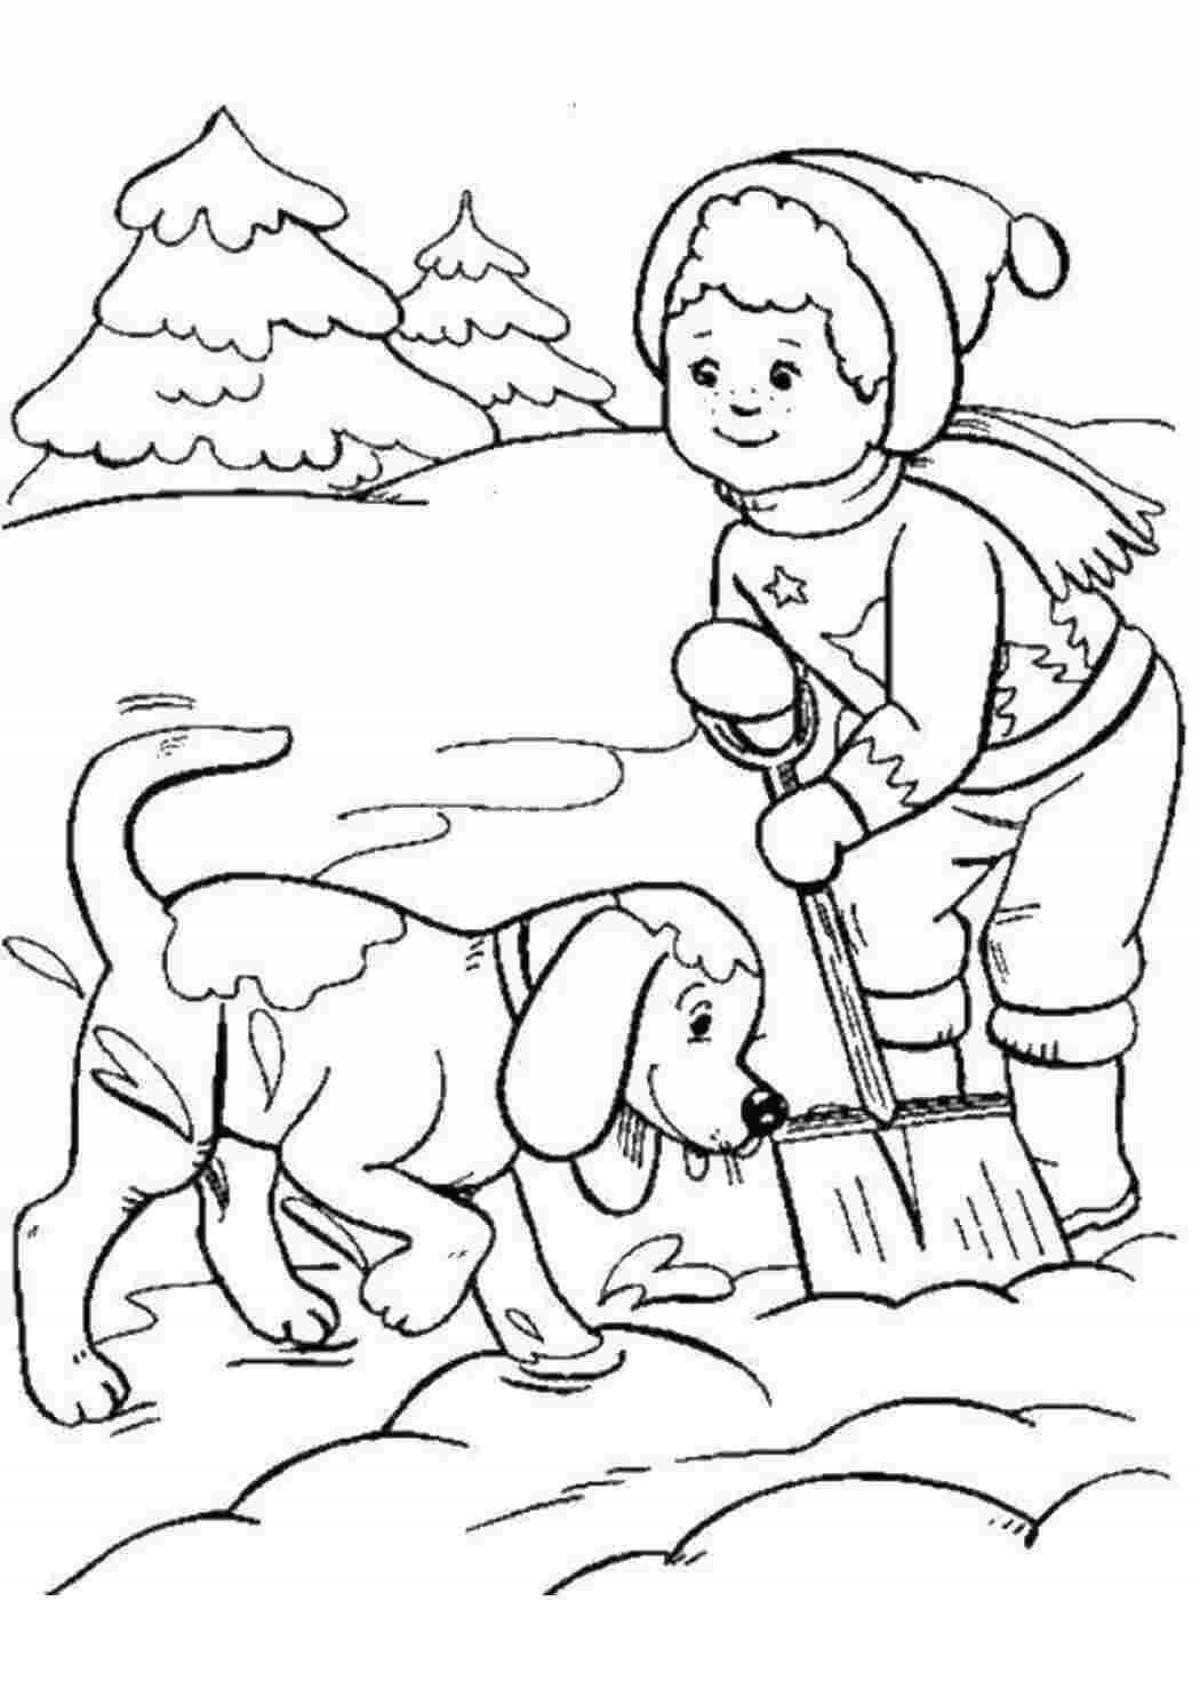 Exquisite winter coloring book for boys